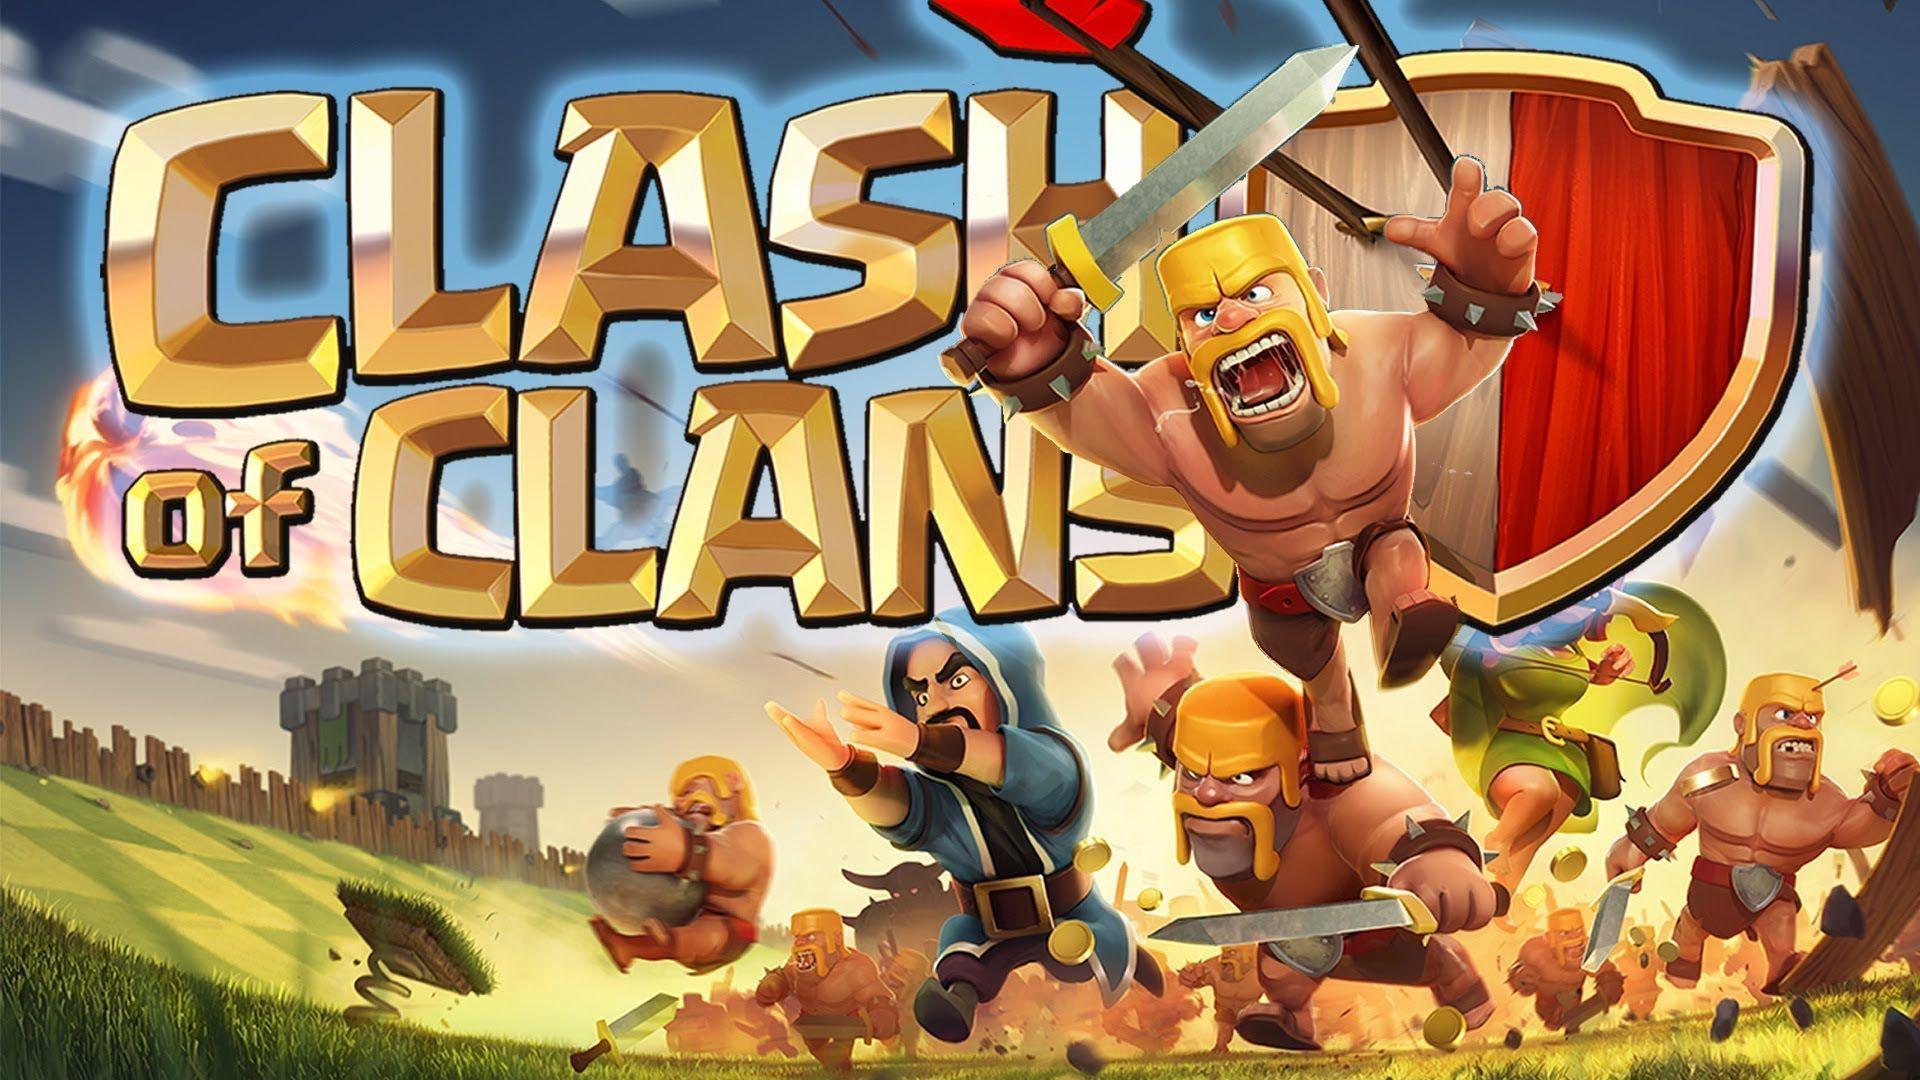 Free download Clash Of Clans Wallpaper [1920x1080] for your Desktop, Mobile & Tablet. Explore Giant Clash Of Clans Wallpaper. Giant Clash Of Clans Wallpaper, Clash Of Clans Wallpaper, Clash